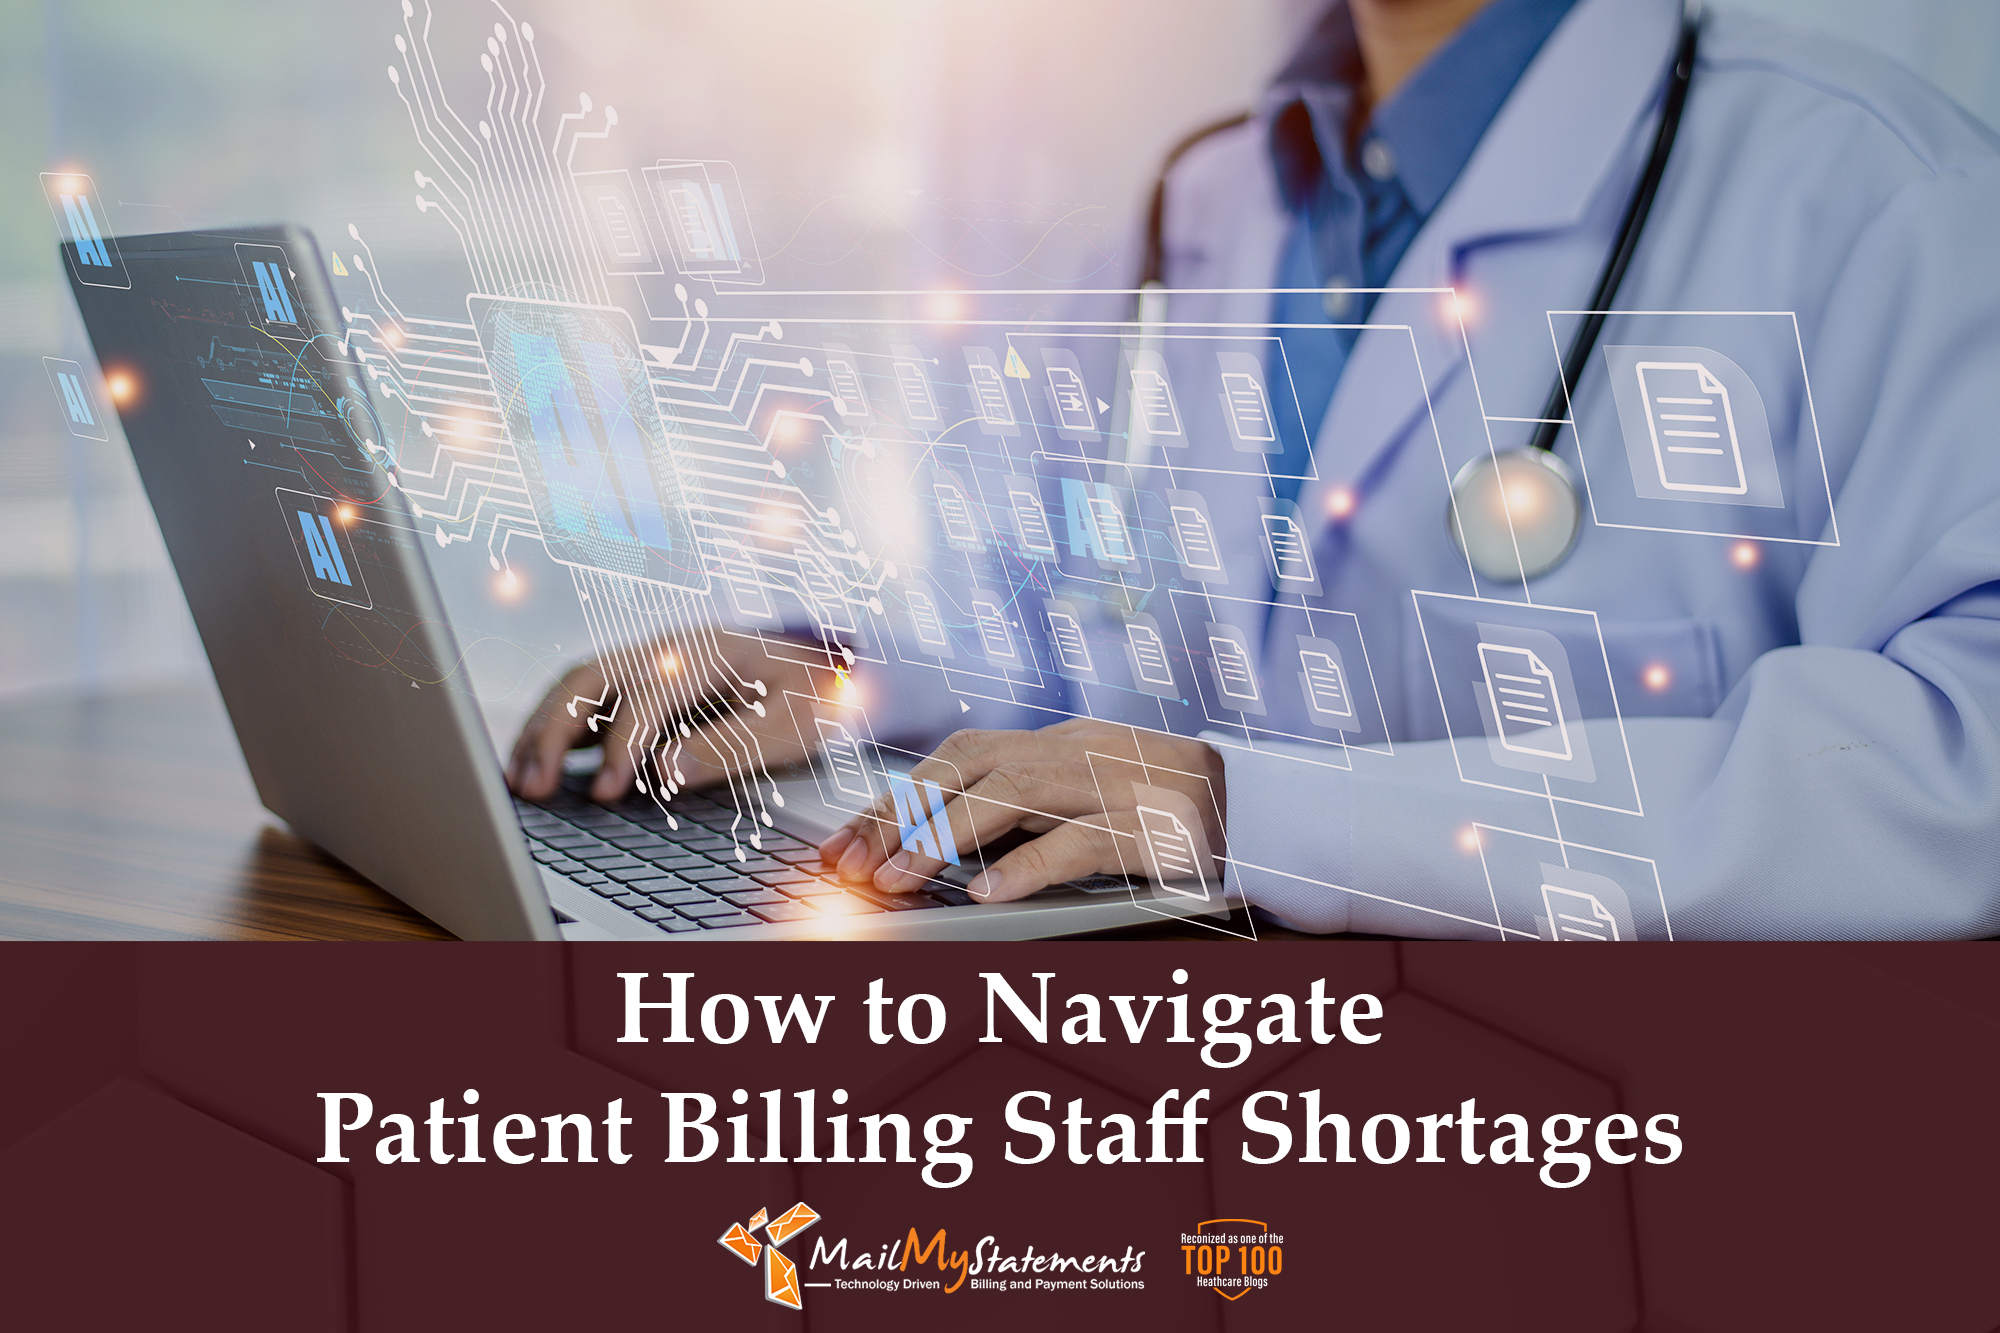 How to Navigate Patient Billing Staff Shortages